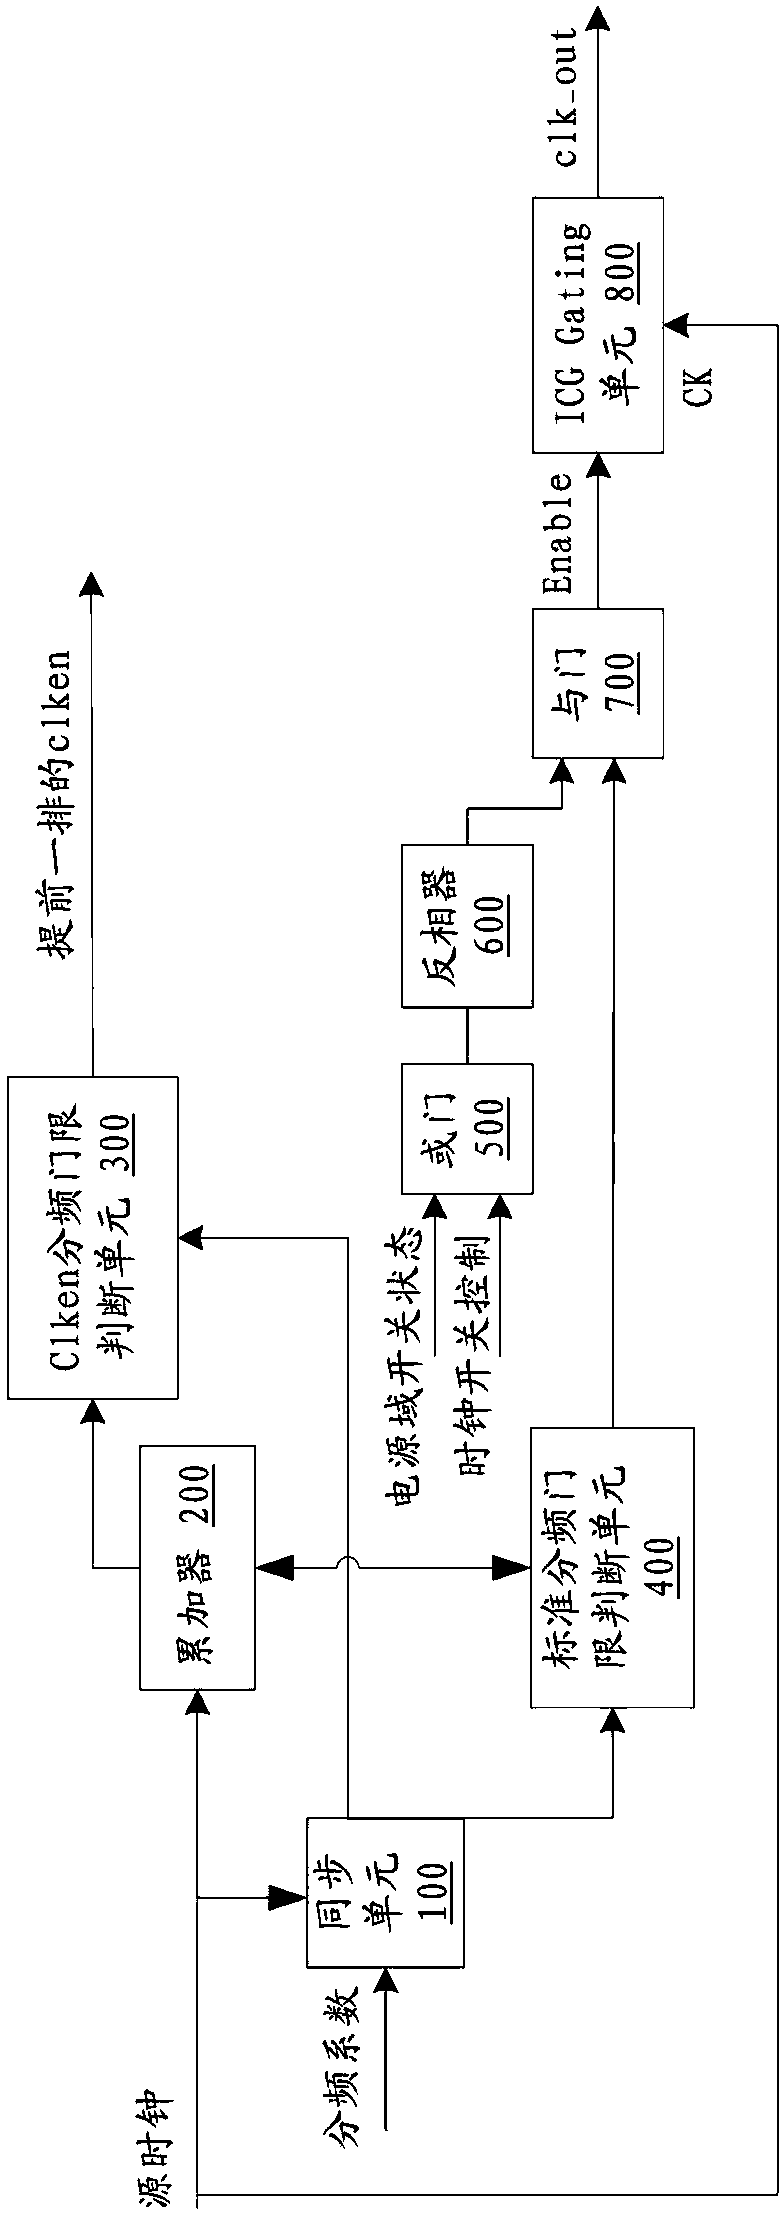 Circuit and method for advancing clock effective signal